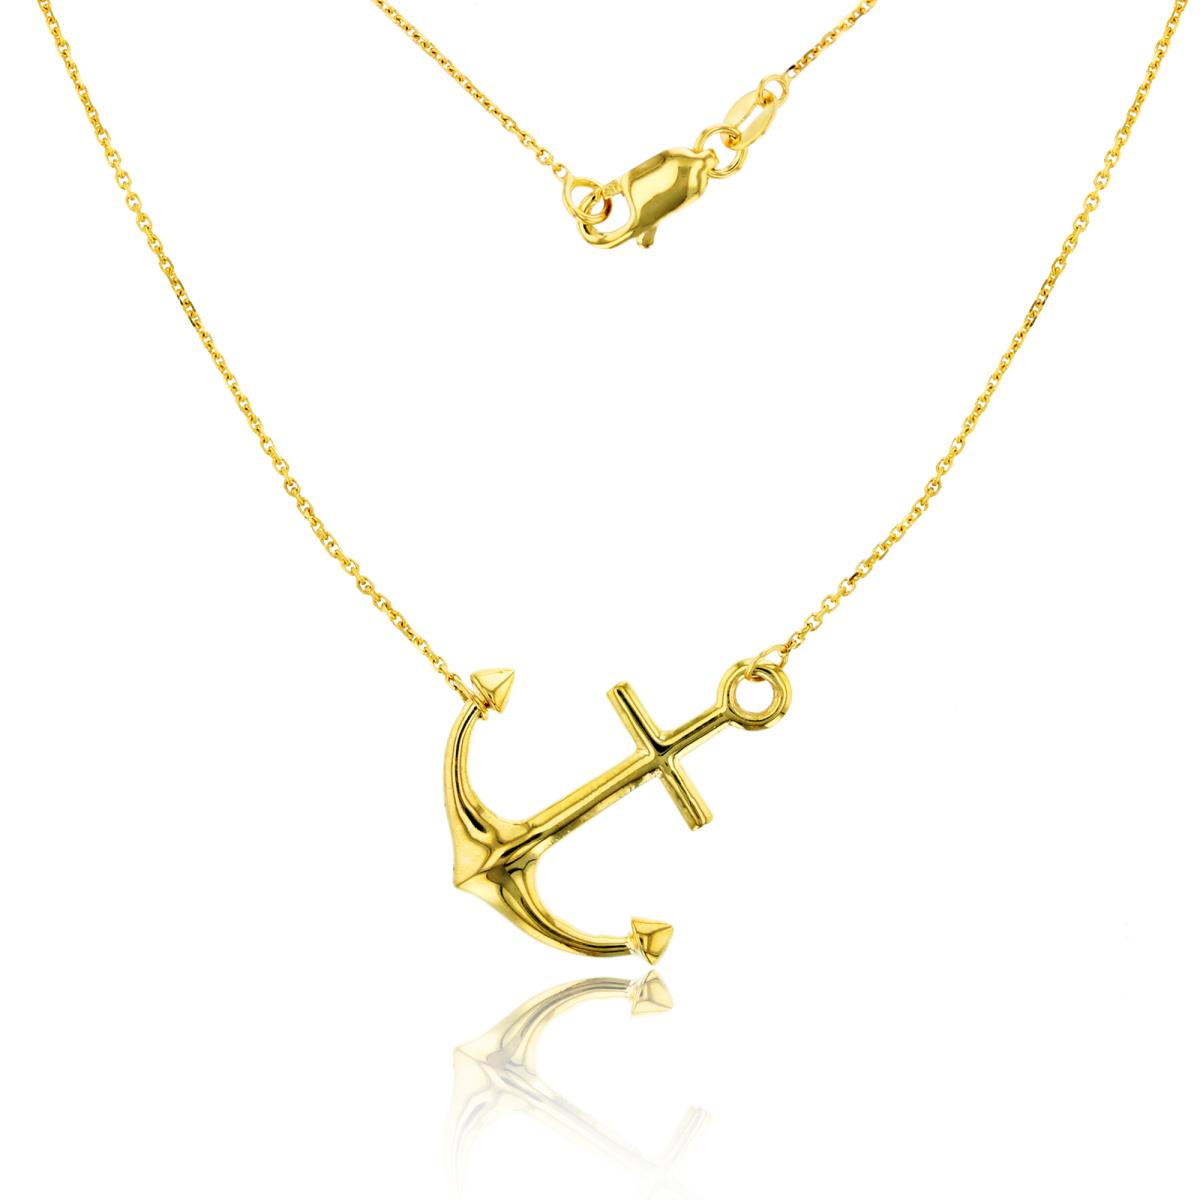 10K Yellow Gold Polished Anchor 18" Necklace